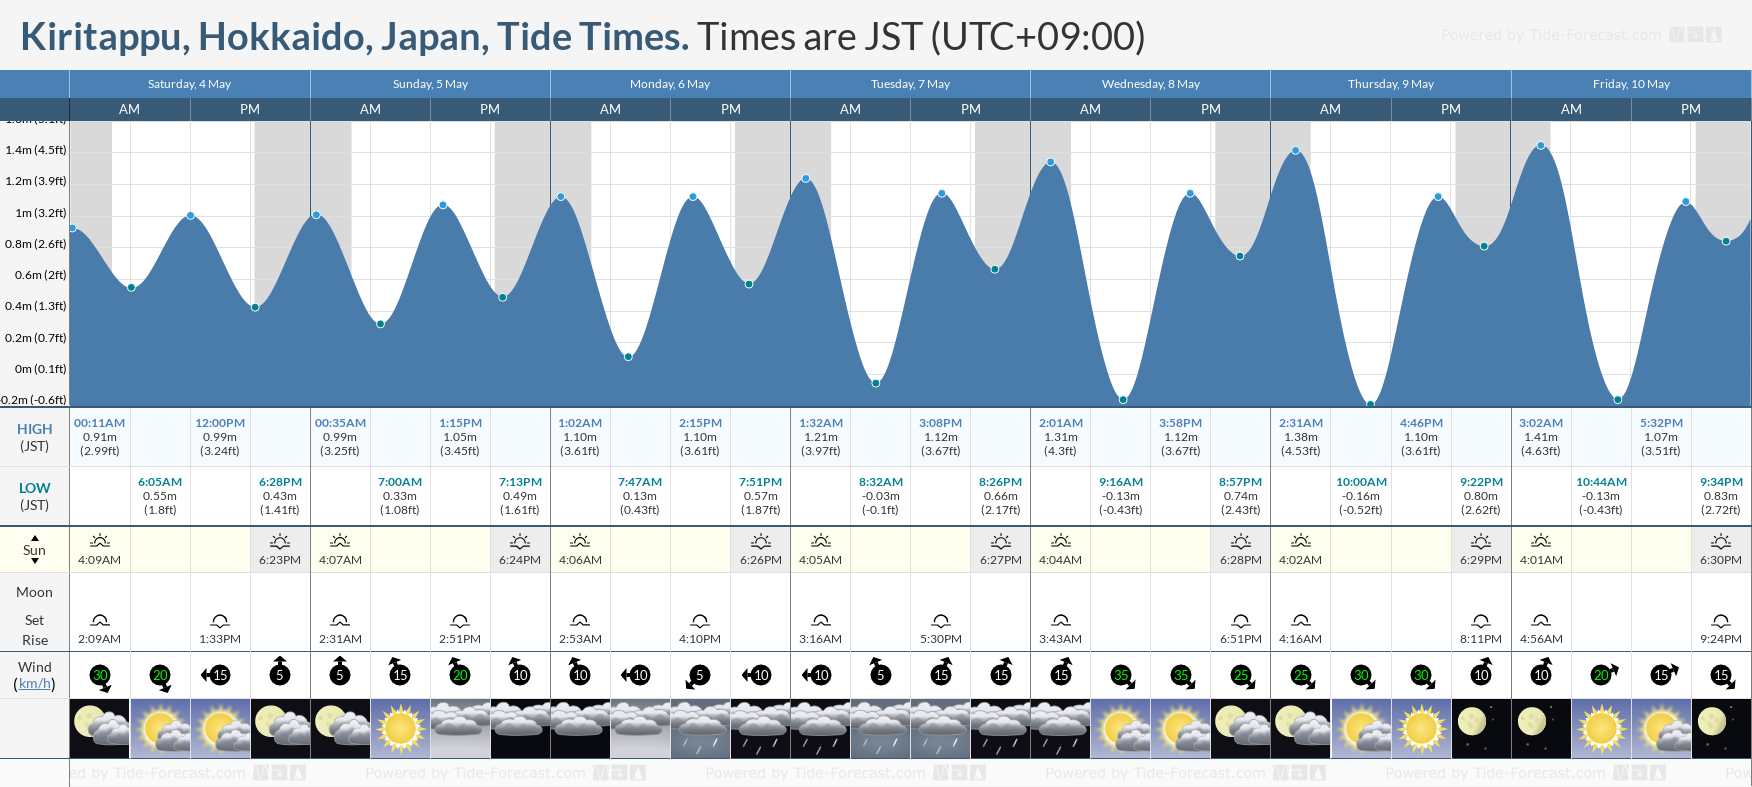 Kiritappu, Hokkaido, Japan Tide Chart including high and low tide tide times for the next 7 days